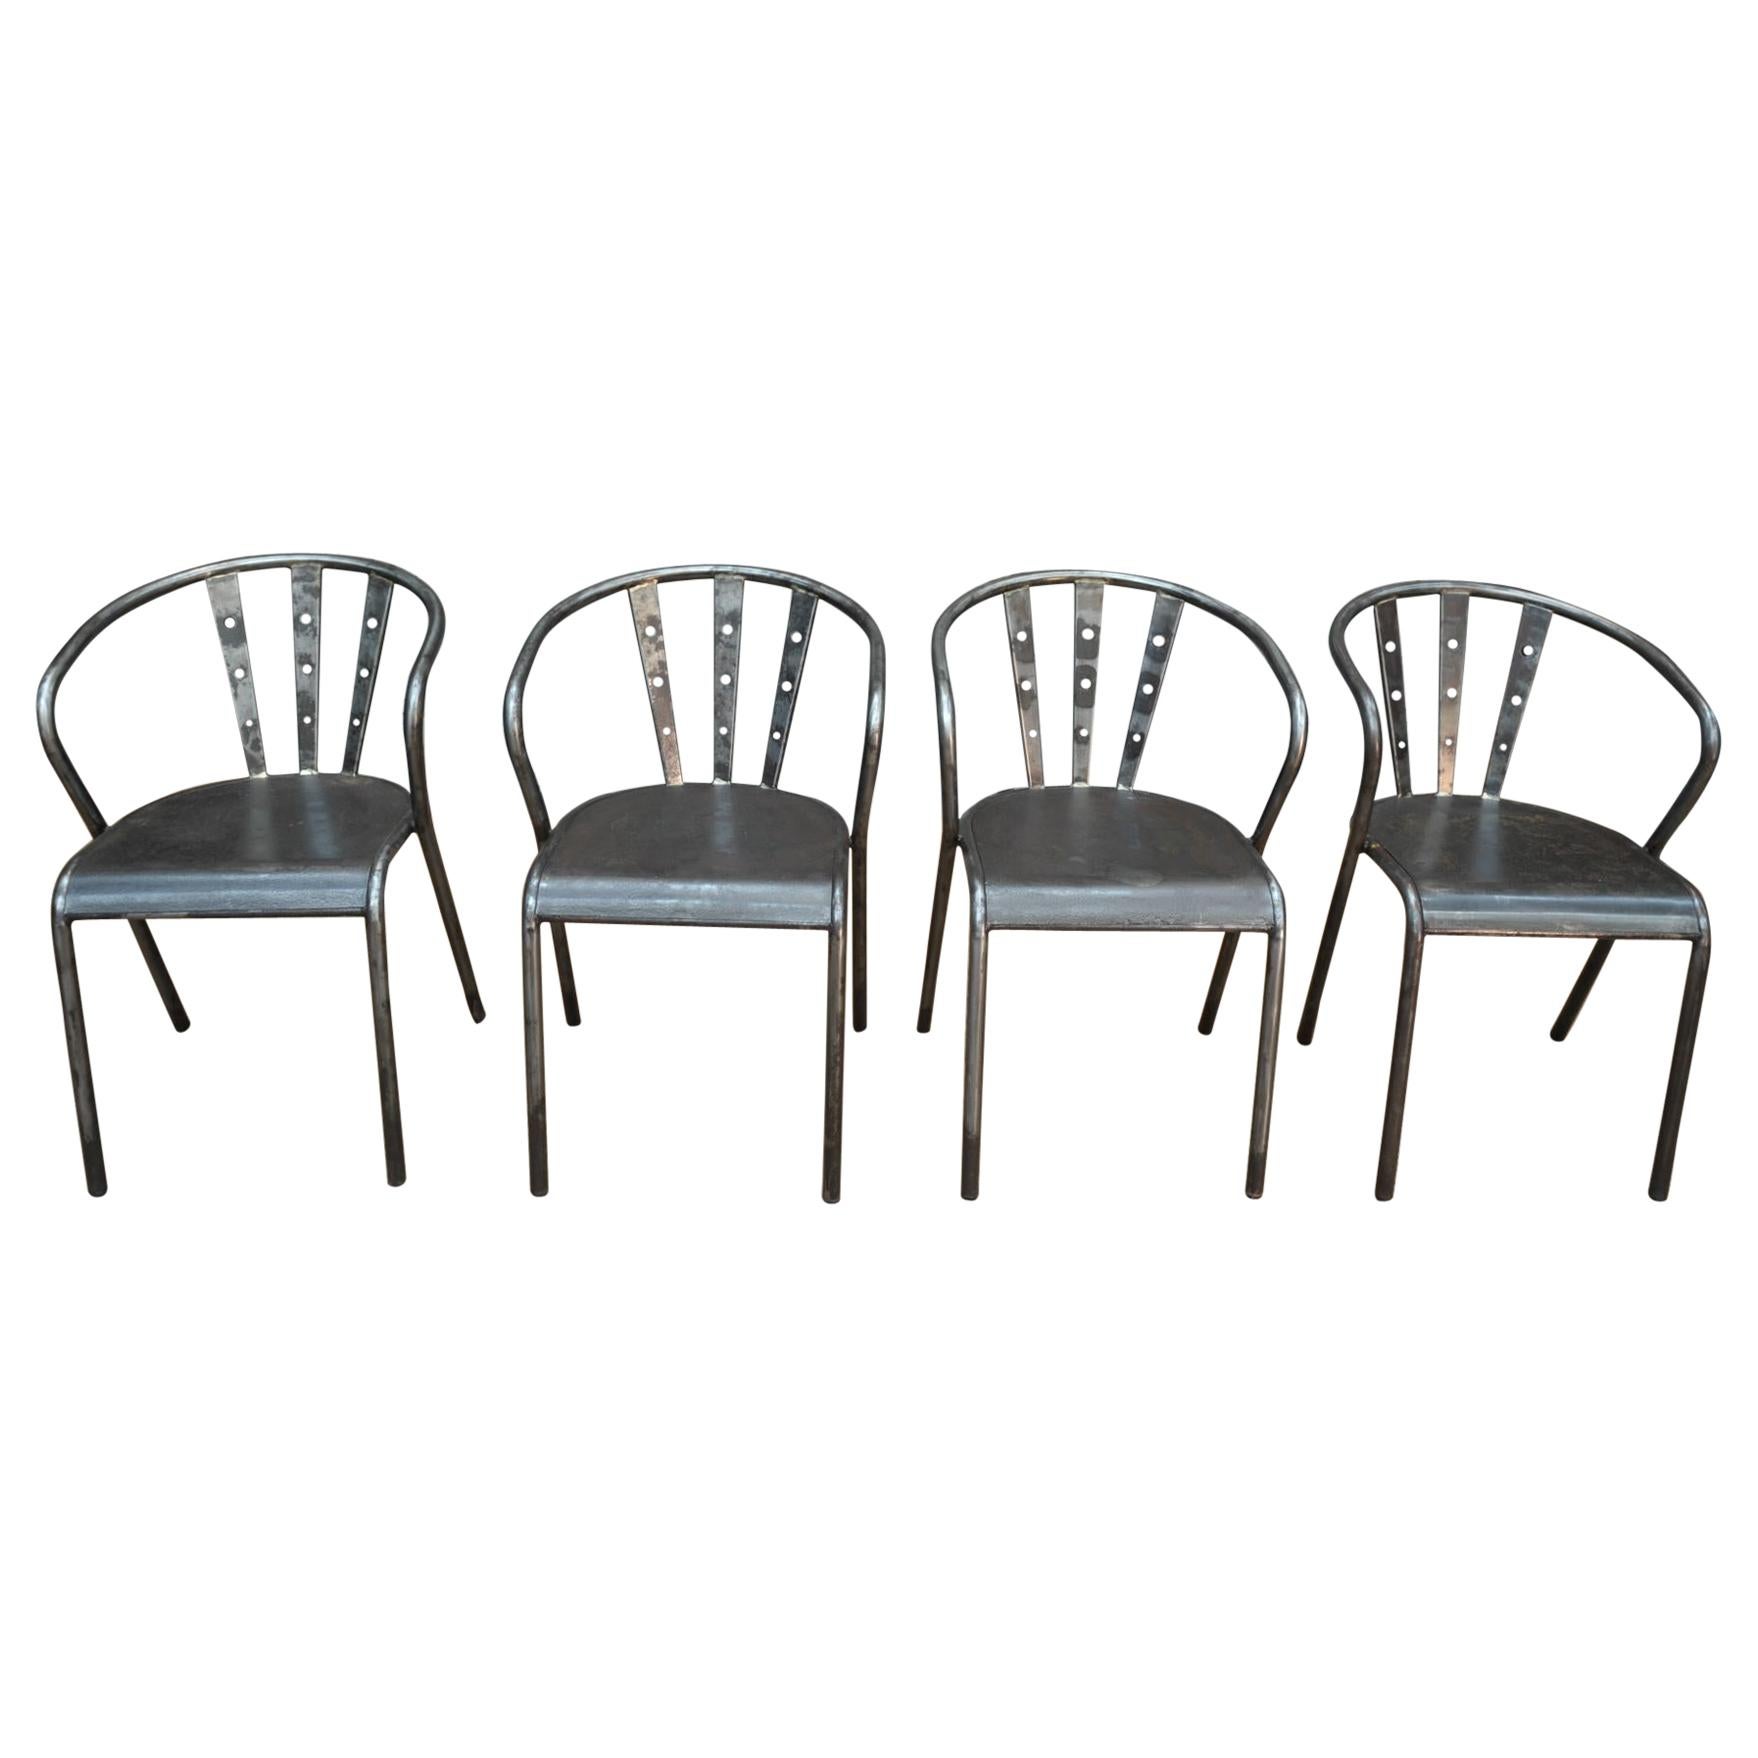 Set of Four Industrial Iron Chairs, circa 1950 For Sale